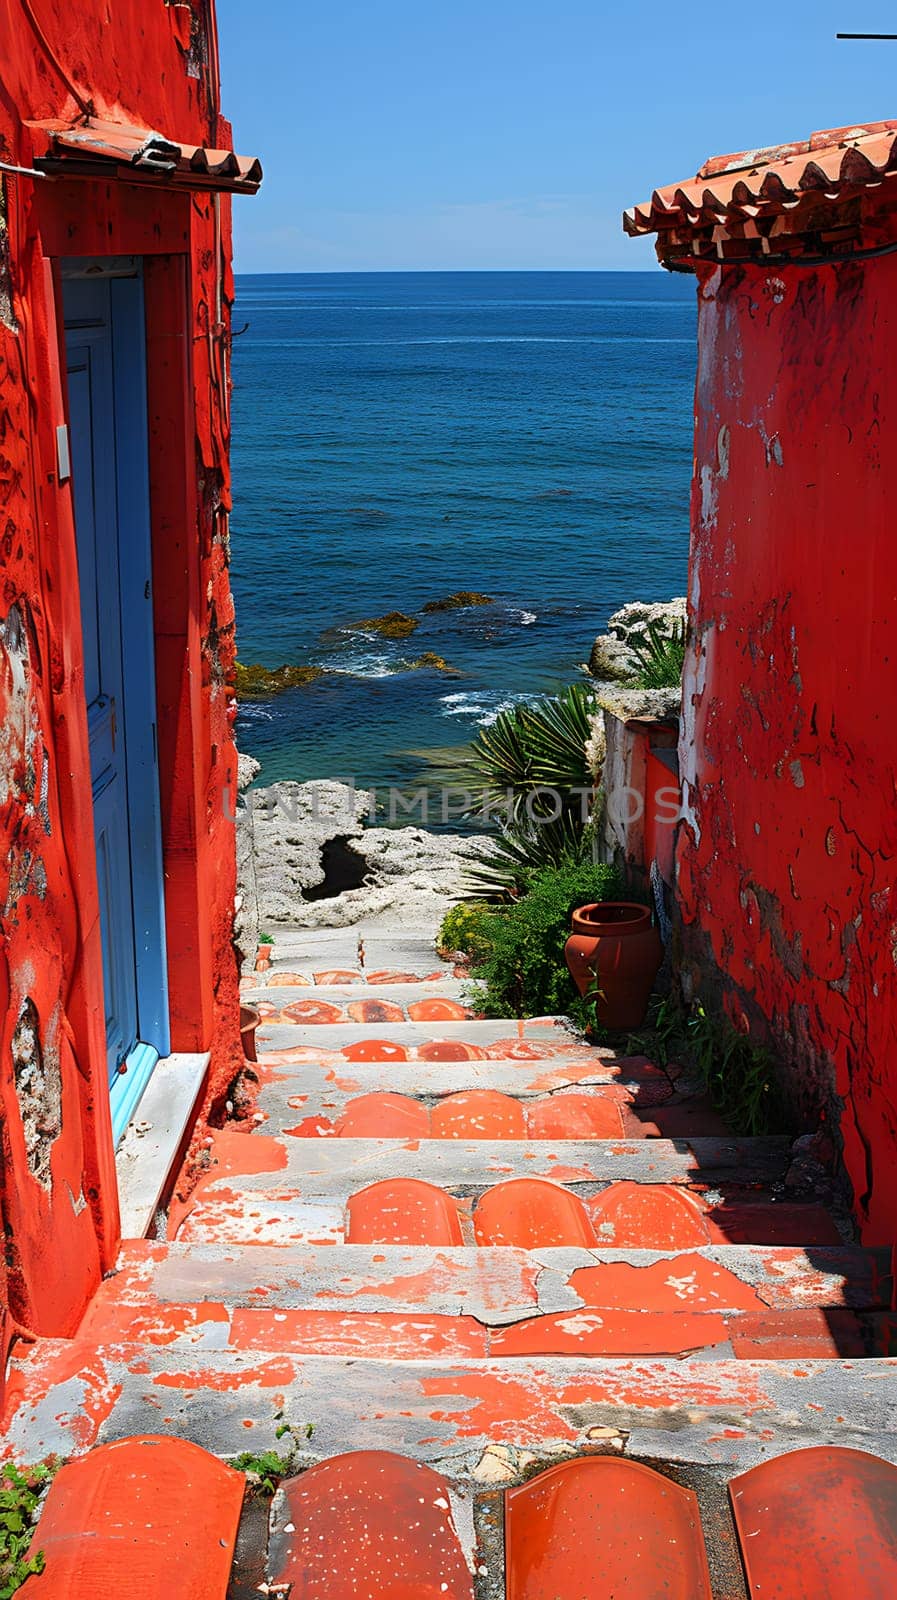 A red structure with a vibrant azure door stands against the backdrop of the ocean. The wooden walls contrast beautifully with the surrounding coastal landscape